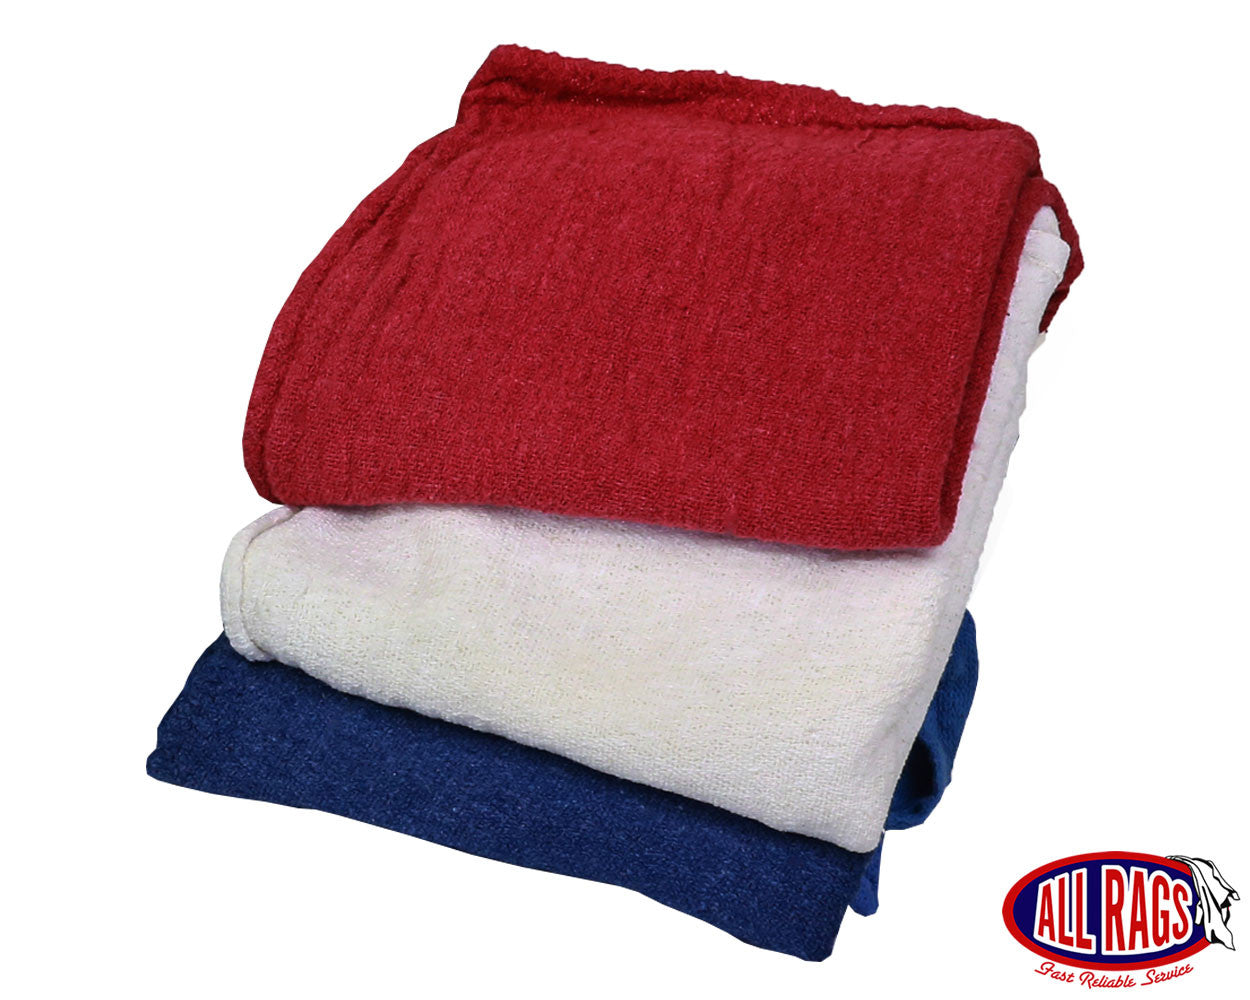 White 100% Cotton Lint Free Industrial Garage Cleaning Rags Wipers